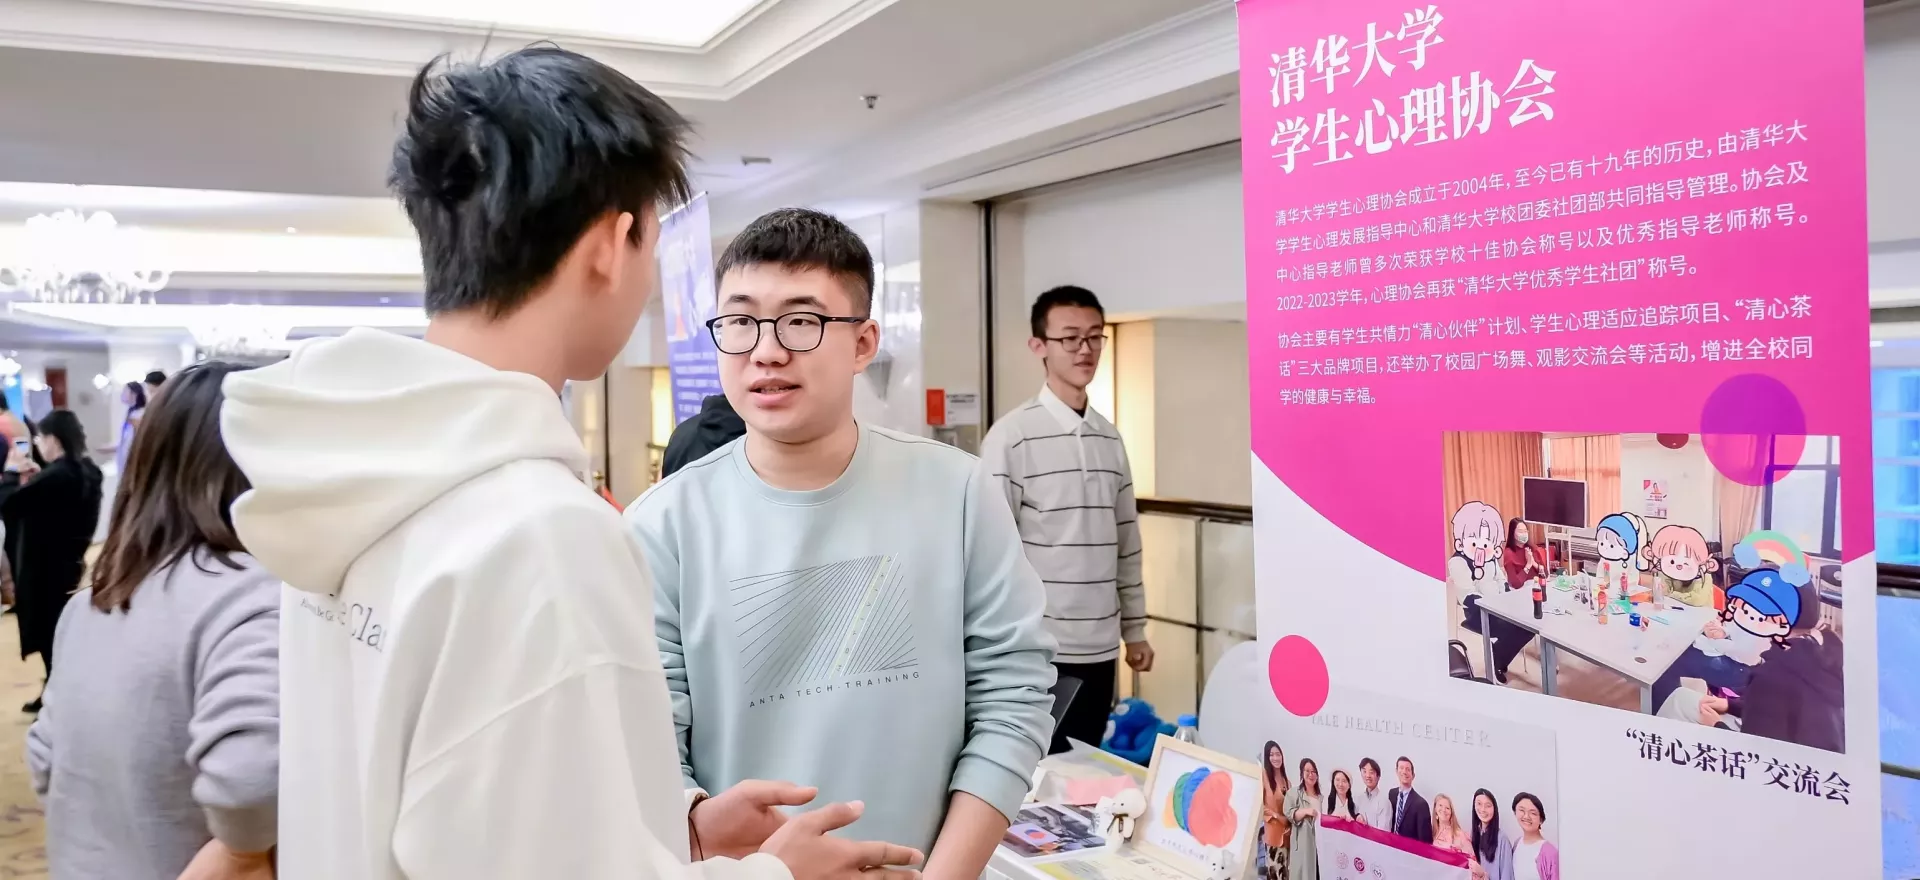 Young people from university mental health clubs showcased peer support activities, Beijing city.